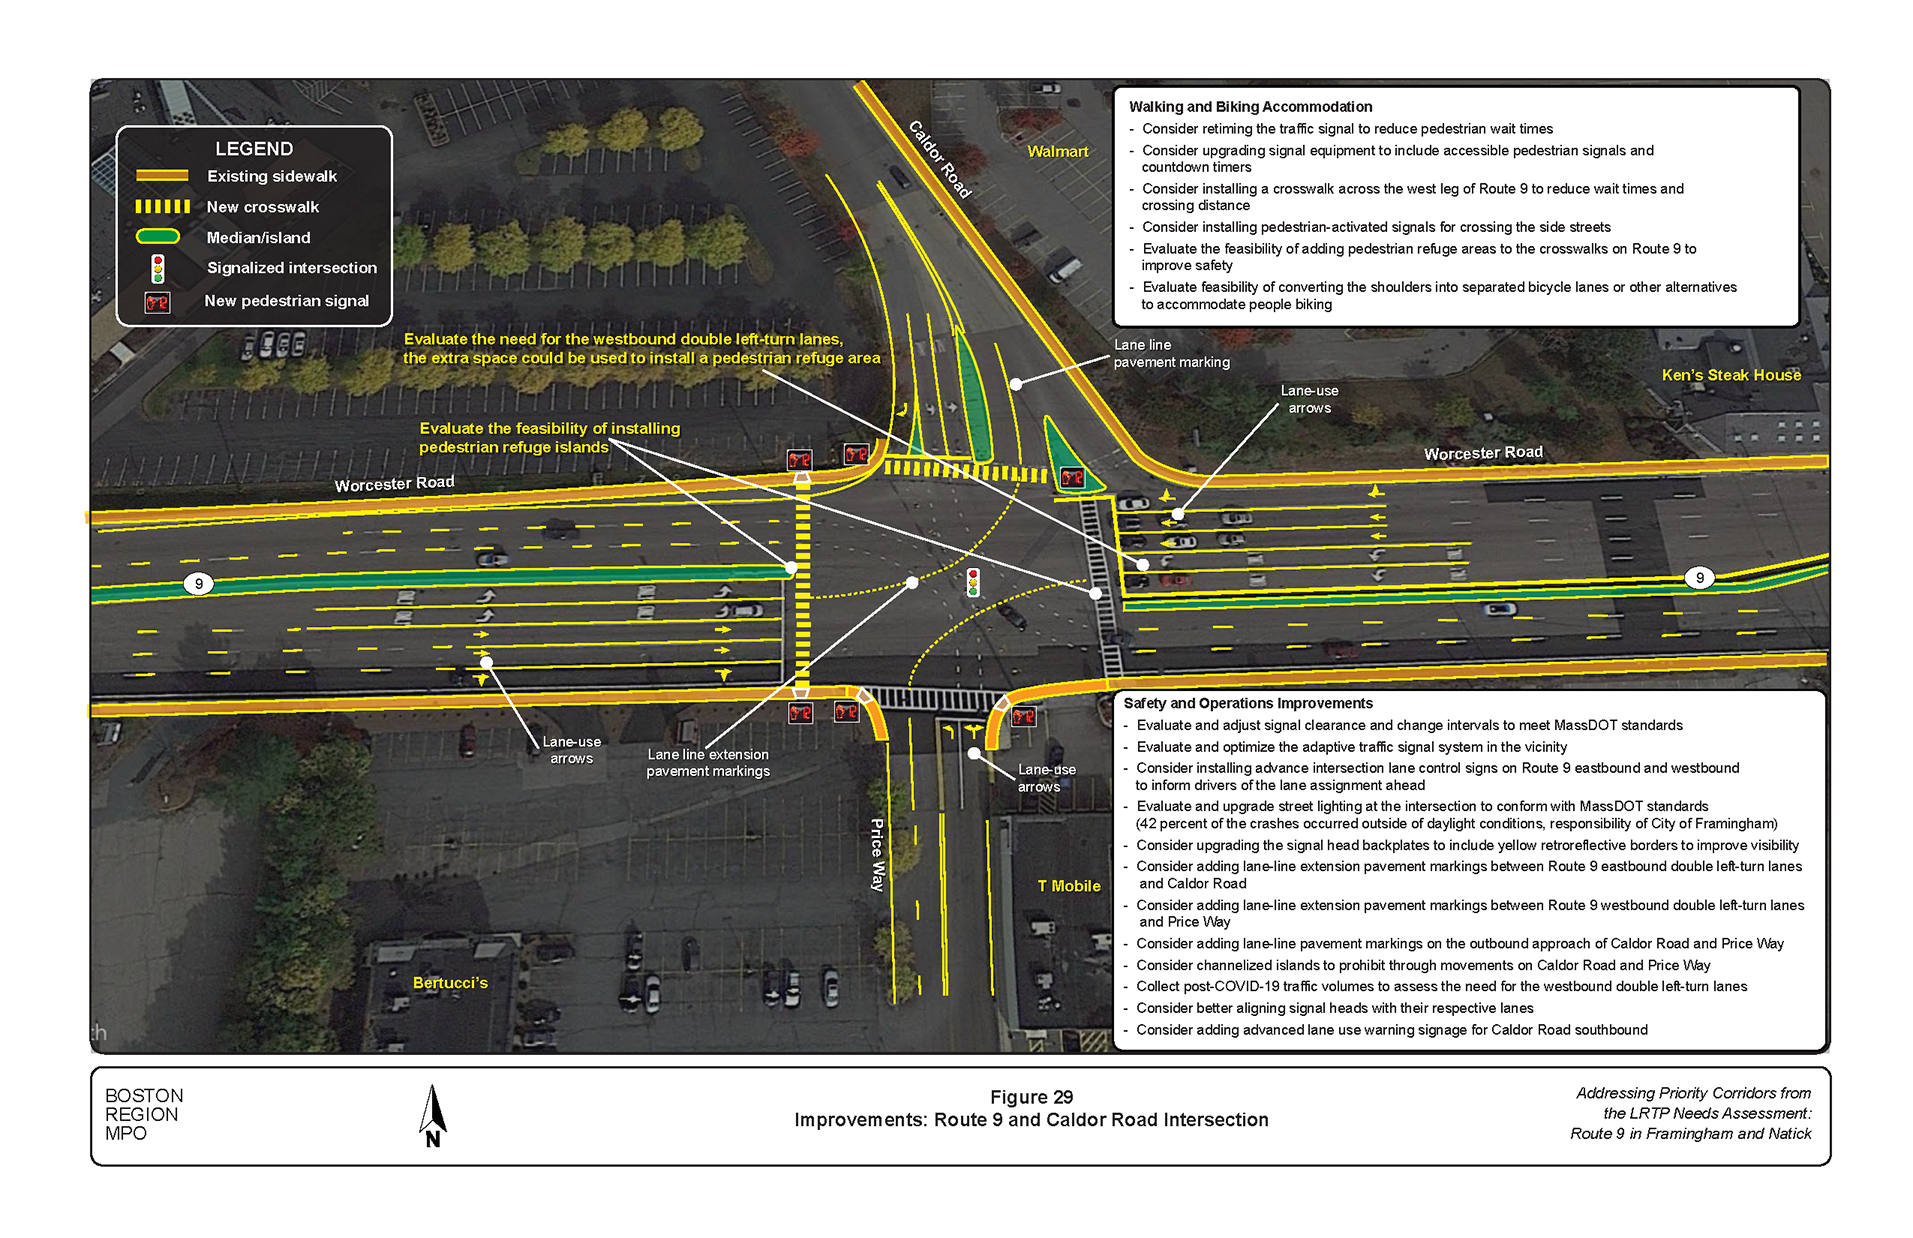 Figure 29 is an aerial photo showing the intersection of Route 9 and Caldor Road and the improvements